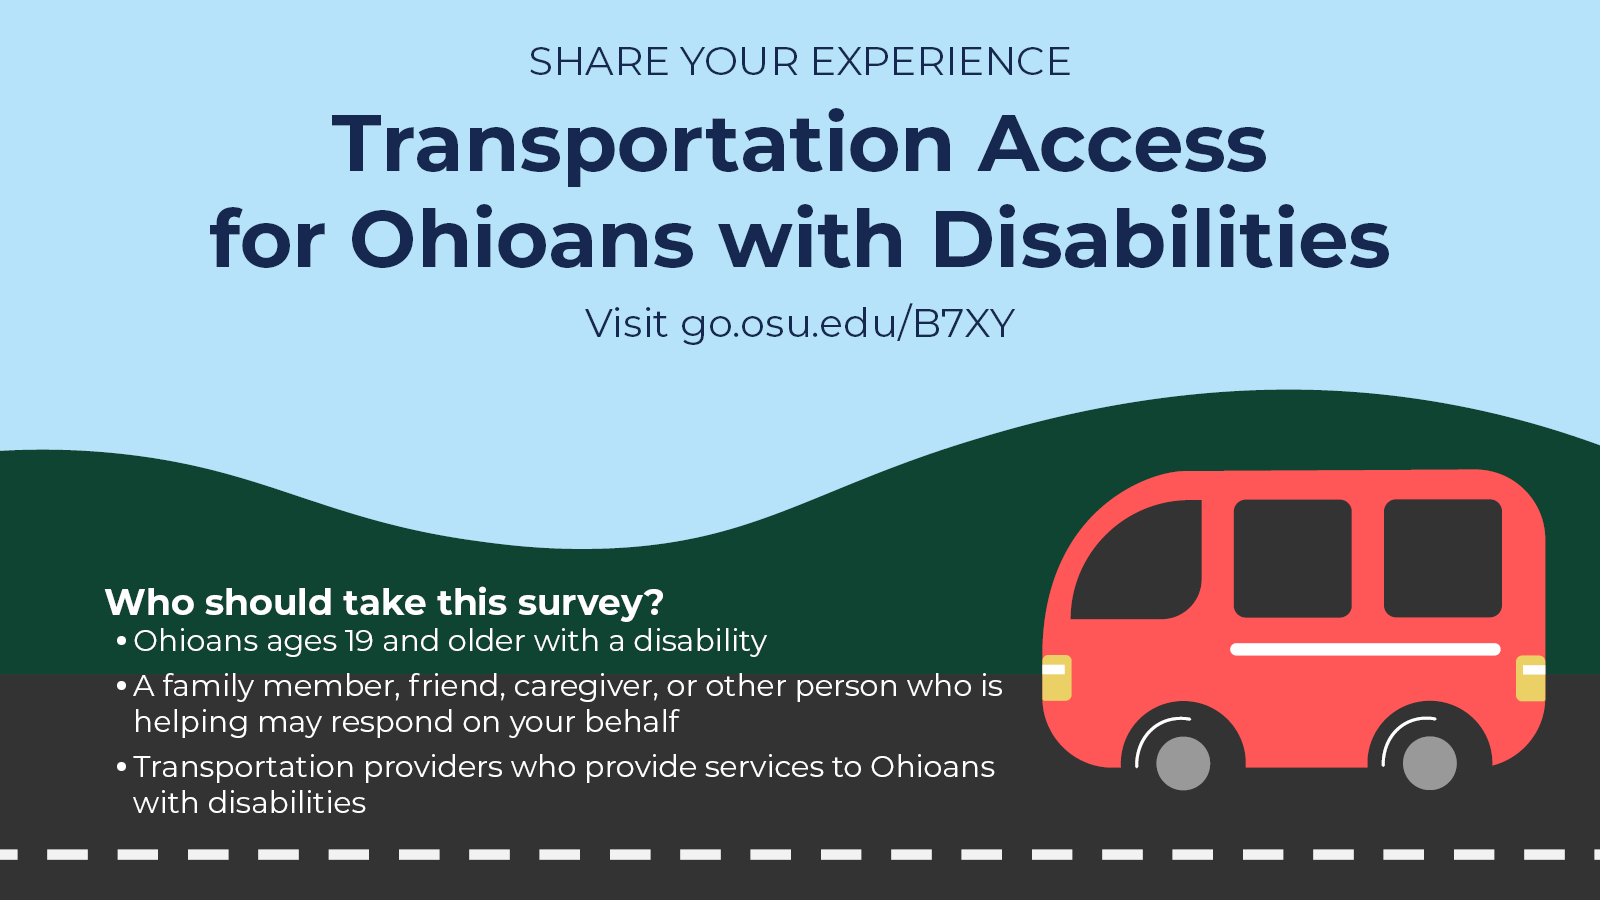 Illustration of a red van on a road. Text reads: Share your experience. Transportation Access for Ohioans with Disabilities. Visit go.osu.edu/B7XY. Who should take this survey? Ohioans ages 19 and older with a disability. A family member, friend, caregiver, or other person who is helping may respond on your behalf. Transportation providers who provide services to Ohioans with disabilities.